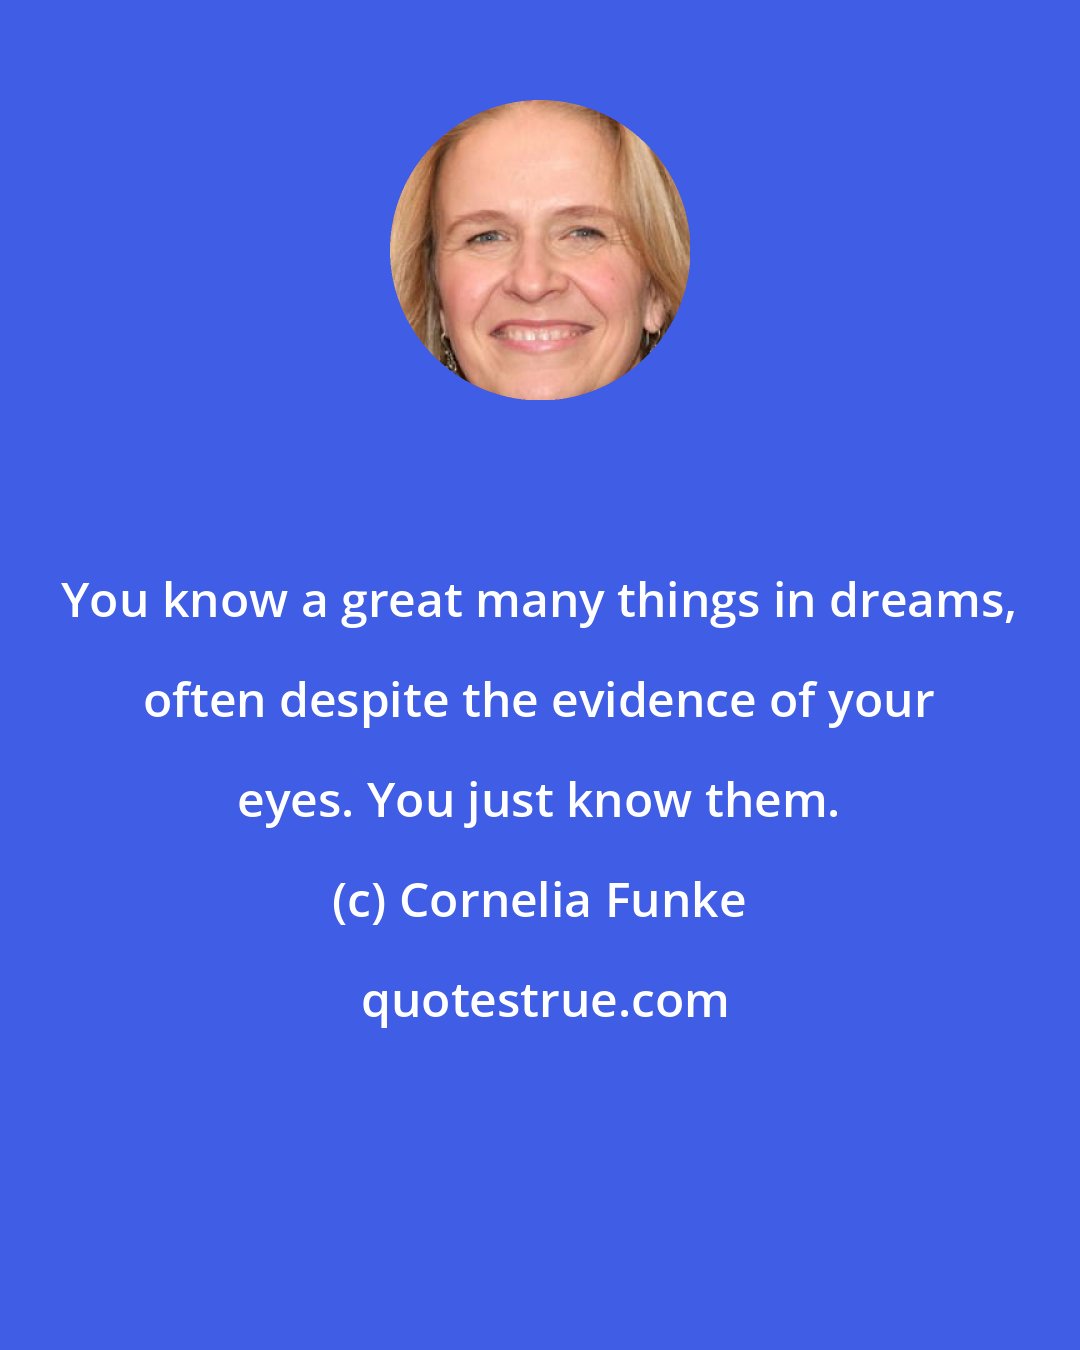 Cornelia Funke: You know a great many things in dreams, often despite the evidence of your eyes. You just know them.